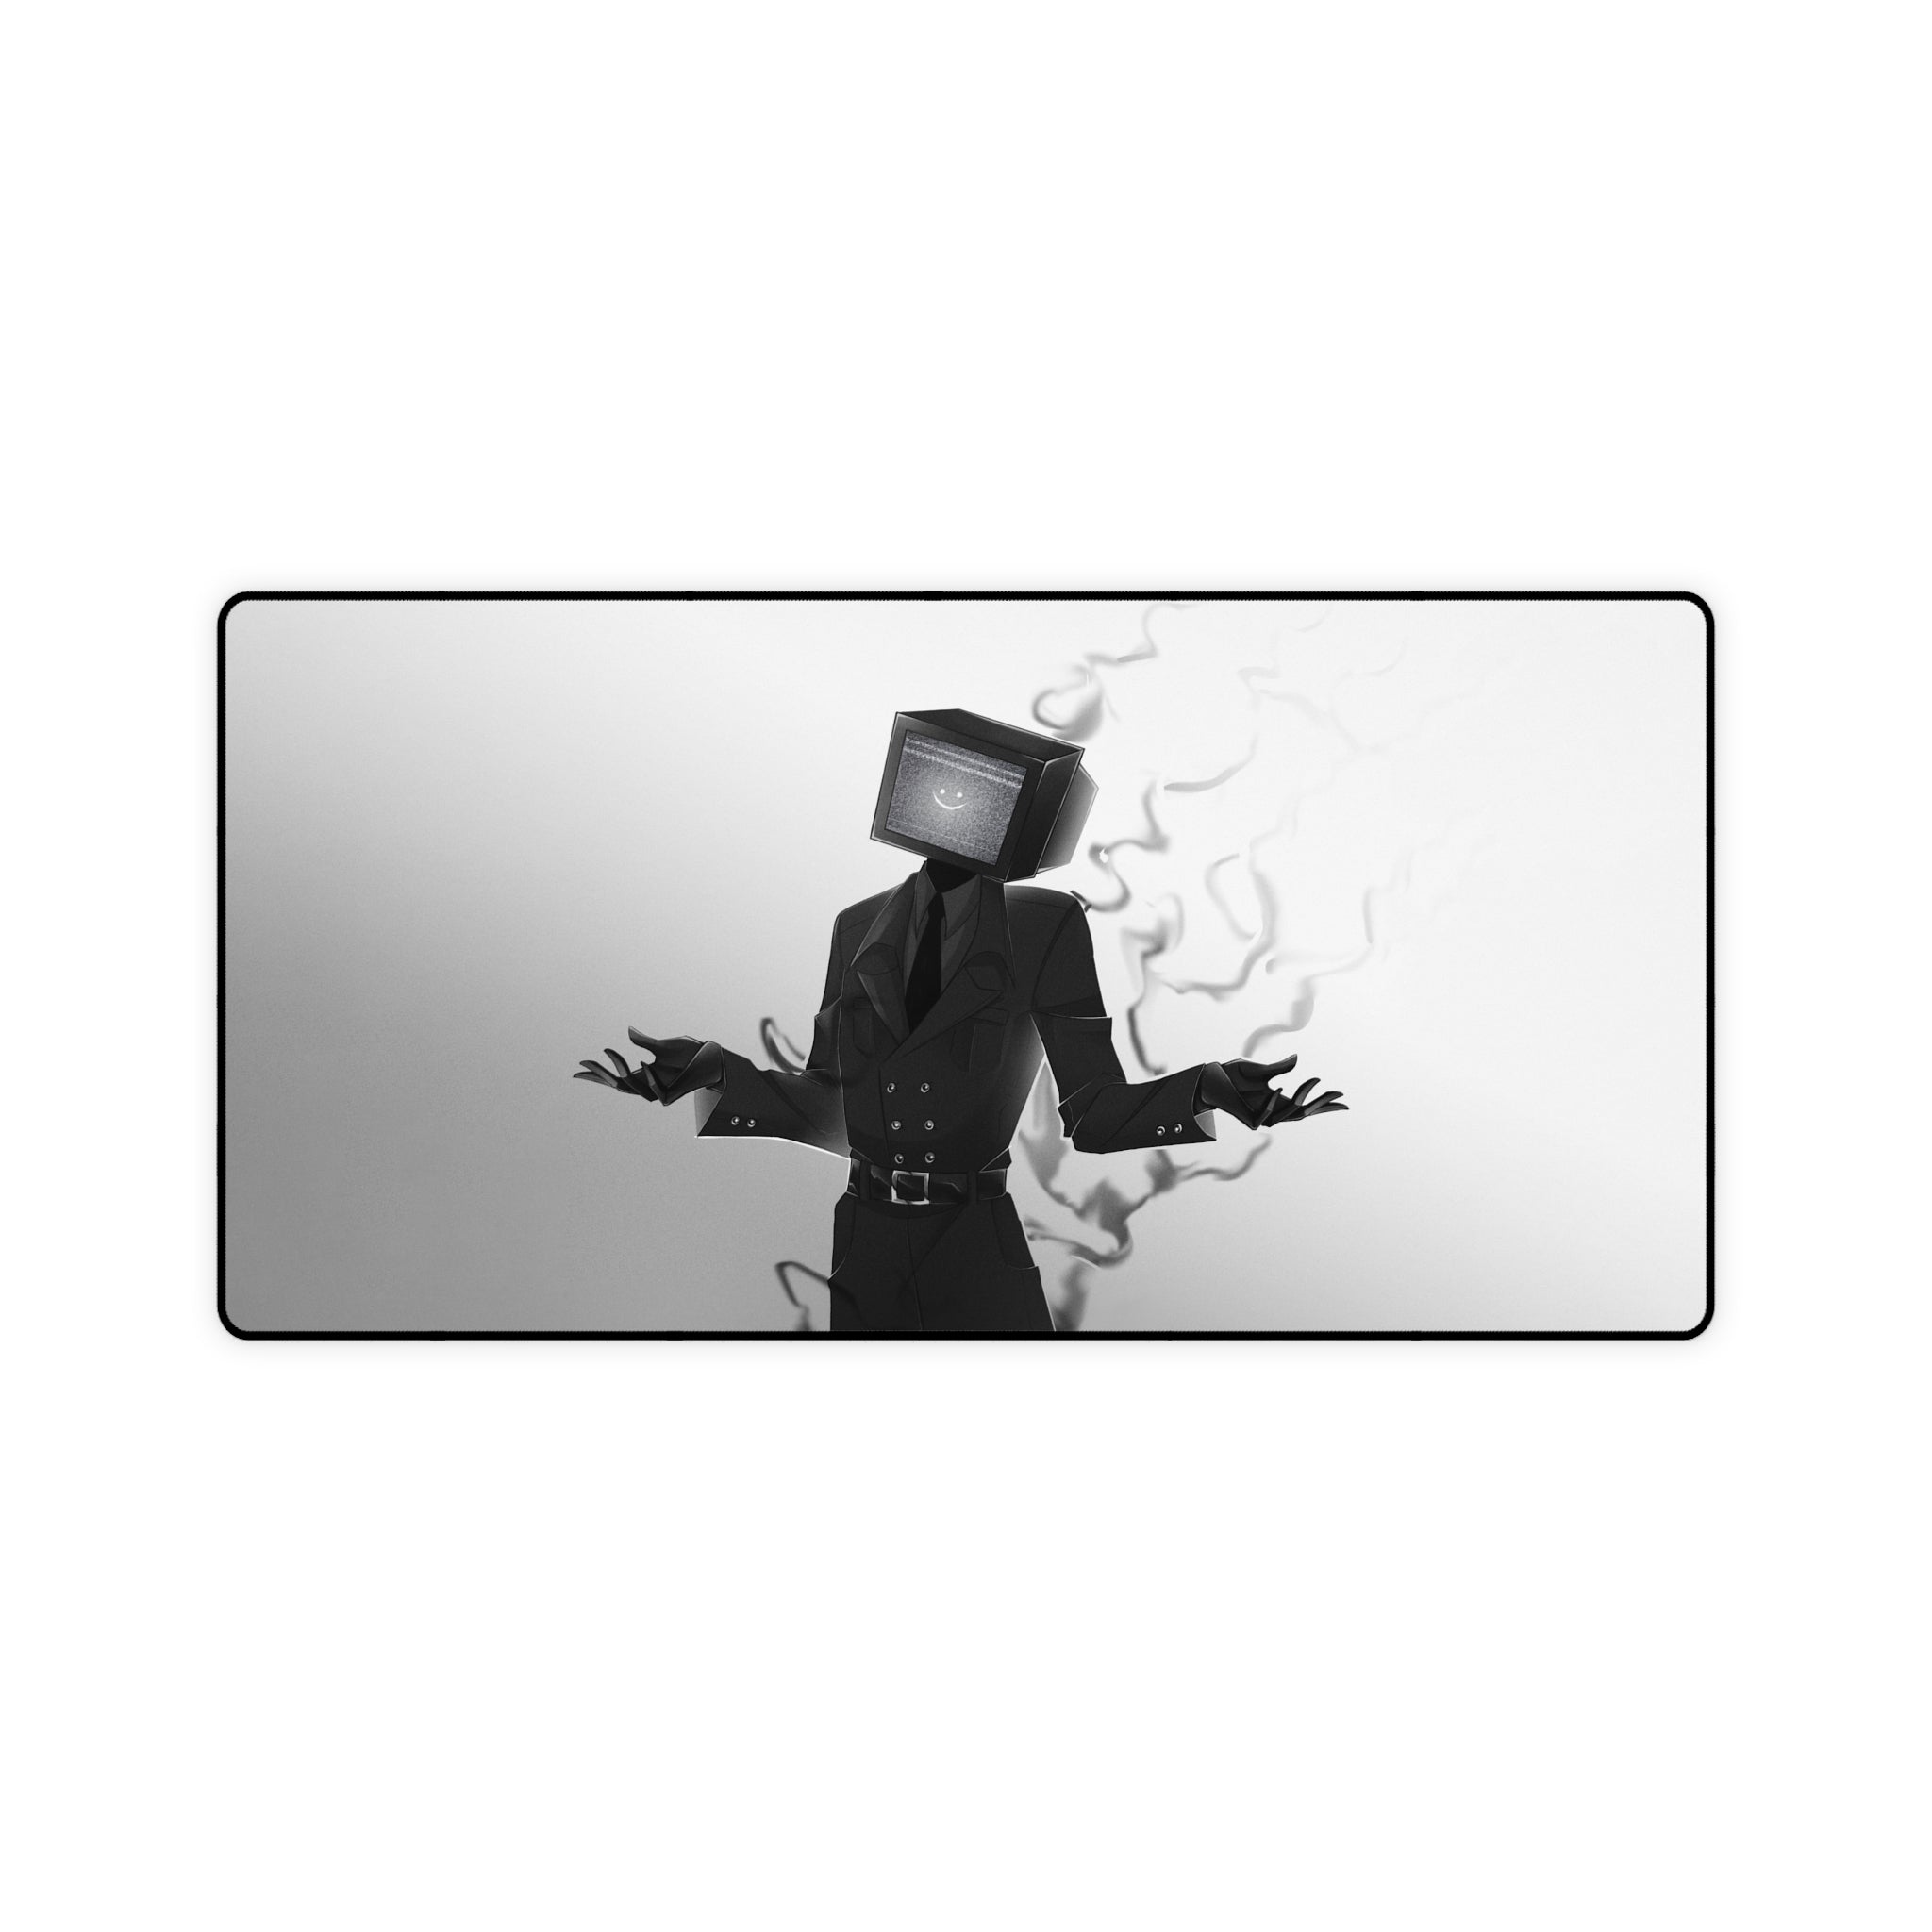 Extra-wide gaming mousepad with gradient smoky TV Man design